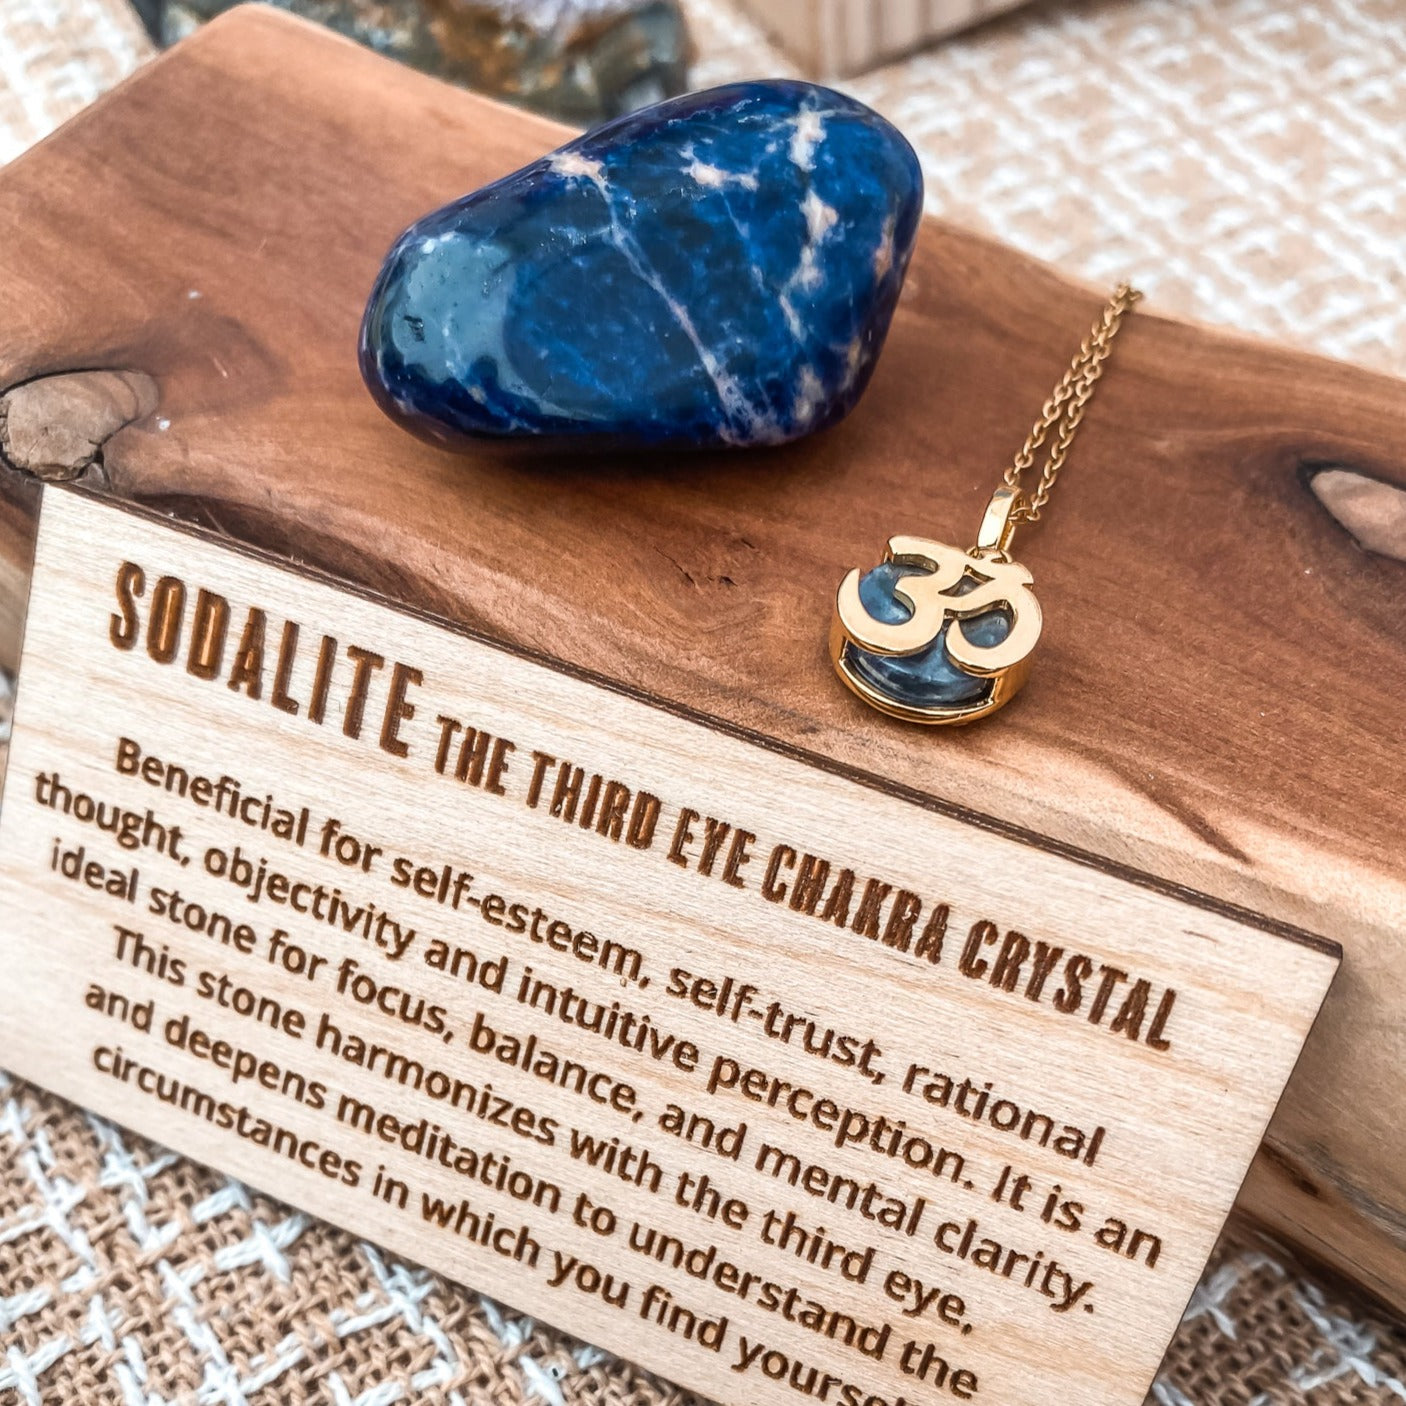 Yellow gold plated Om Yoga charm necklace in Sodalite